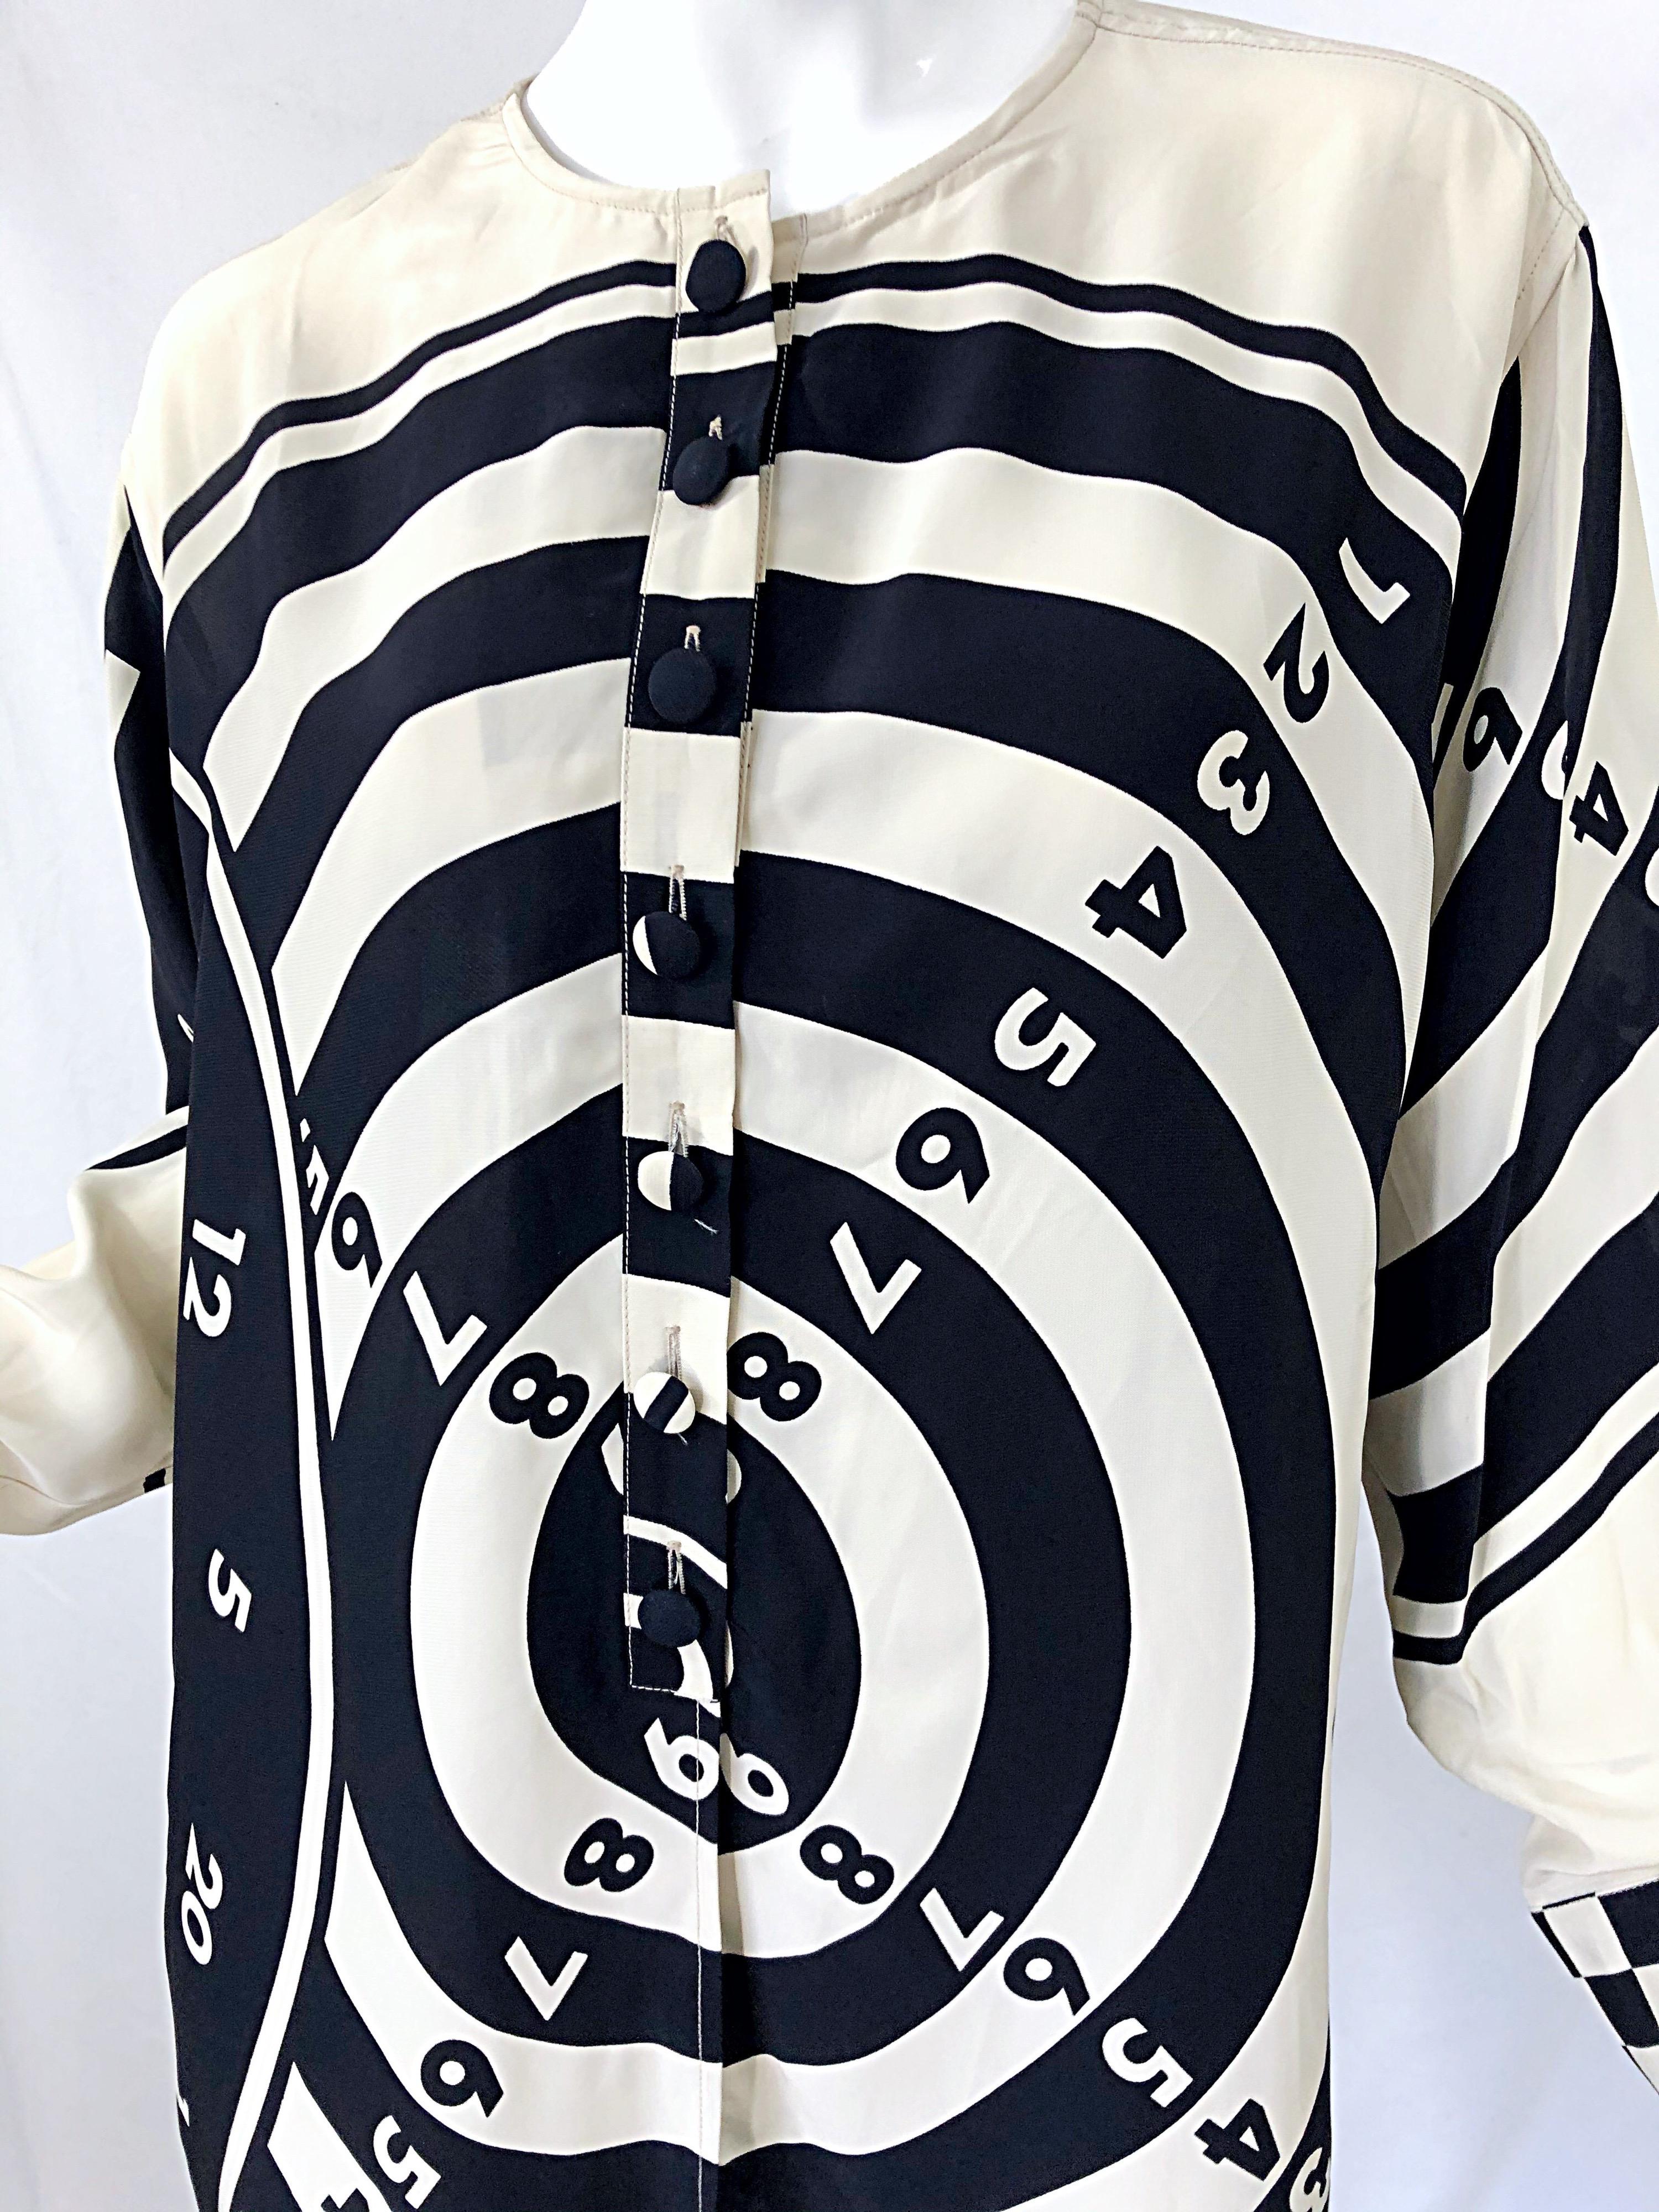 1980s Moschino Cheap & Chic Bullseye Black and White Size 8 Vintage Tunic Dress In Excellent Condition For Sale In San Diego, CA